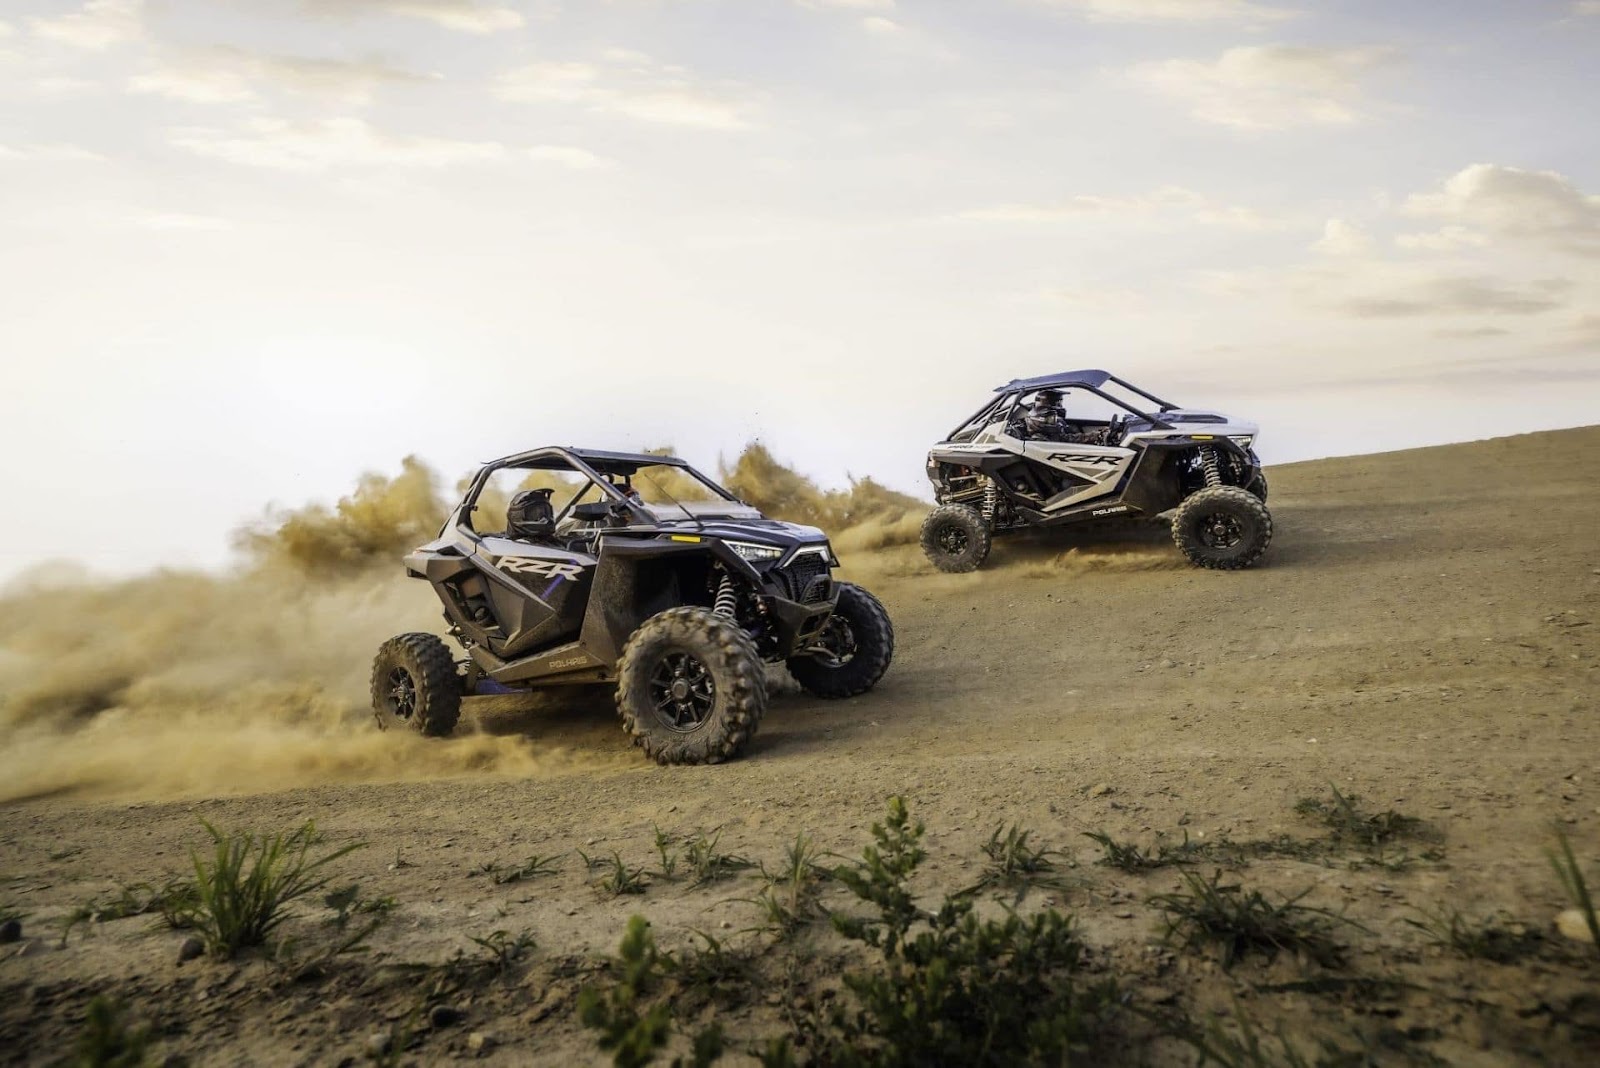 Watch two powerful POLARIS vehicles race up a challenging dirt hill, kicking up clouds of dust and leaving their competitors in the rearview mirror